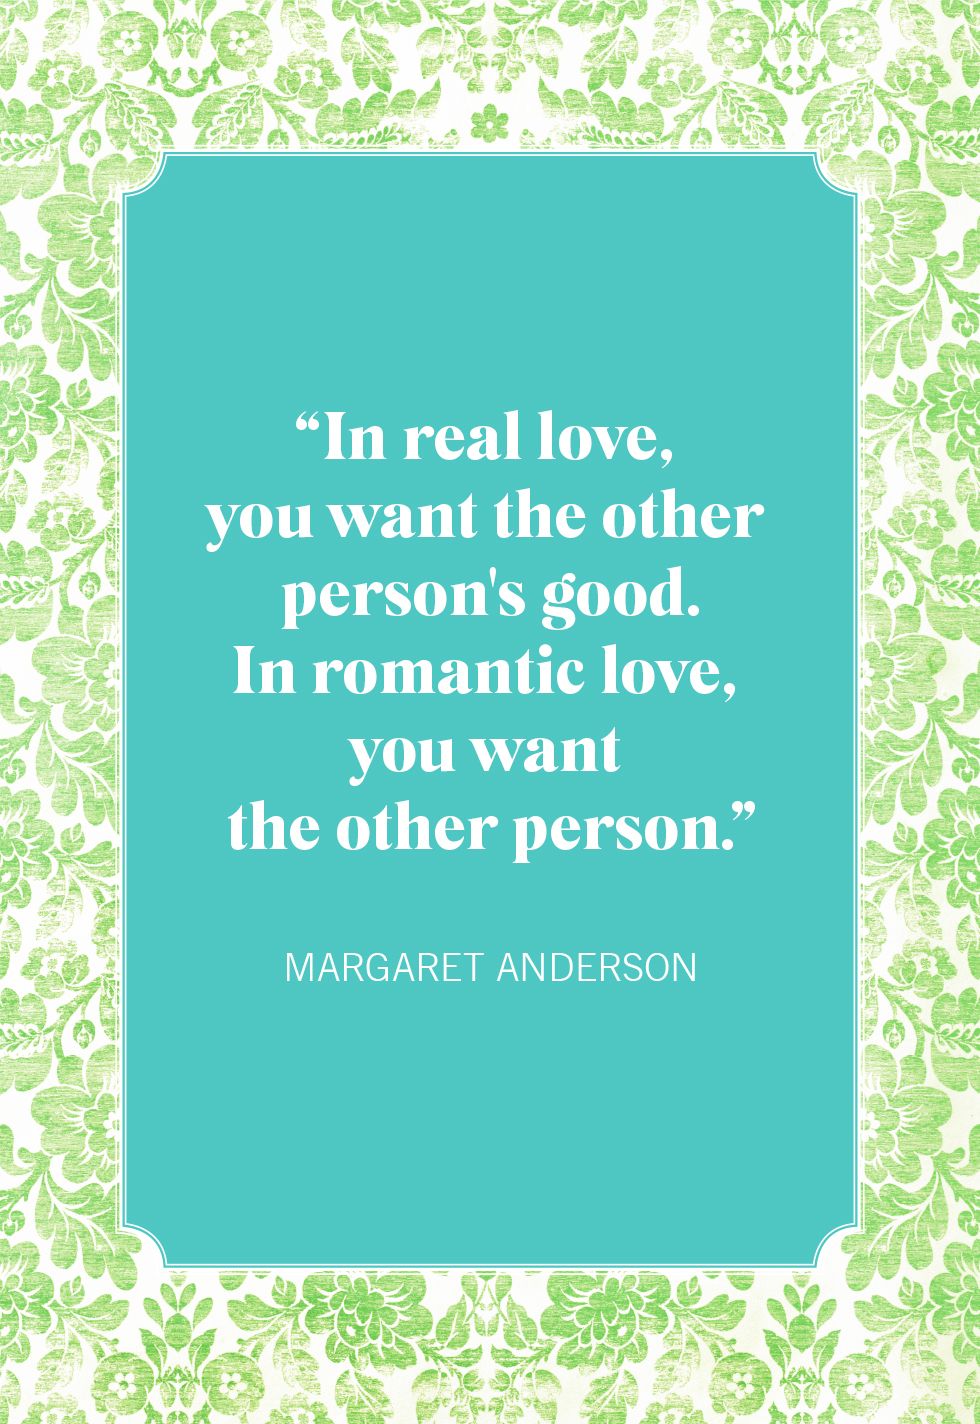 100 Best Love Quotes: Romantic, Sweet and Lovely Sayings